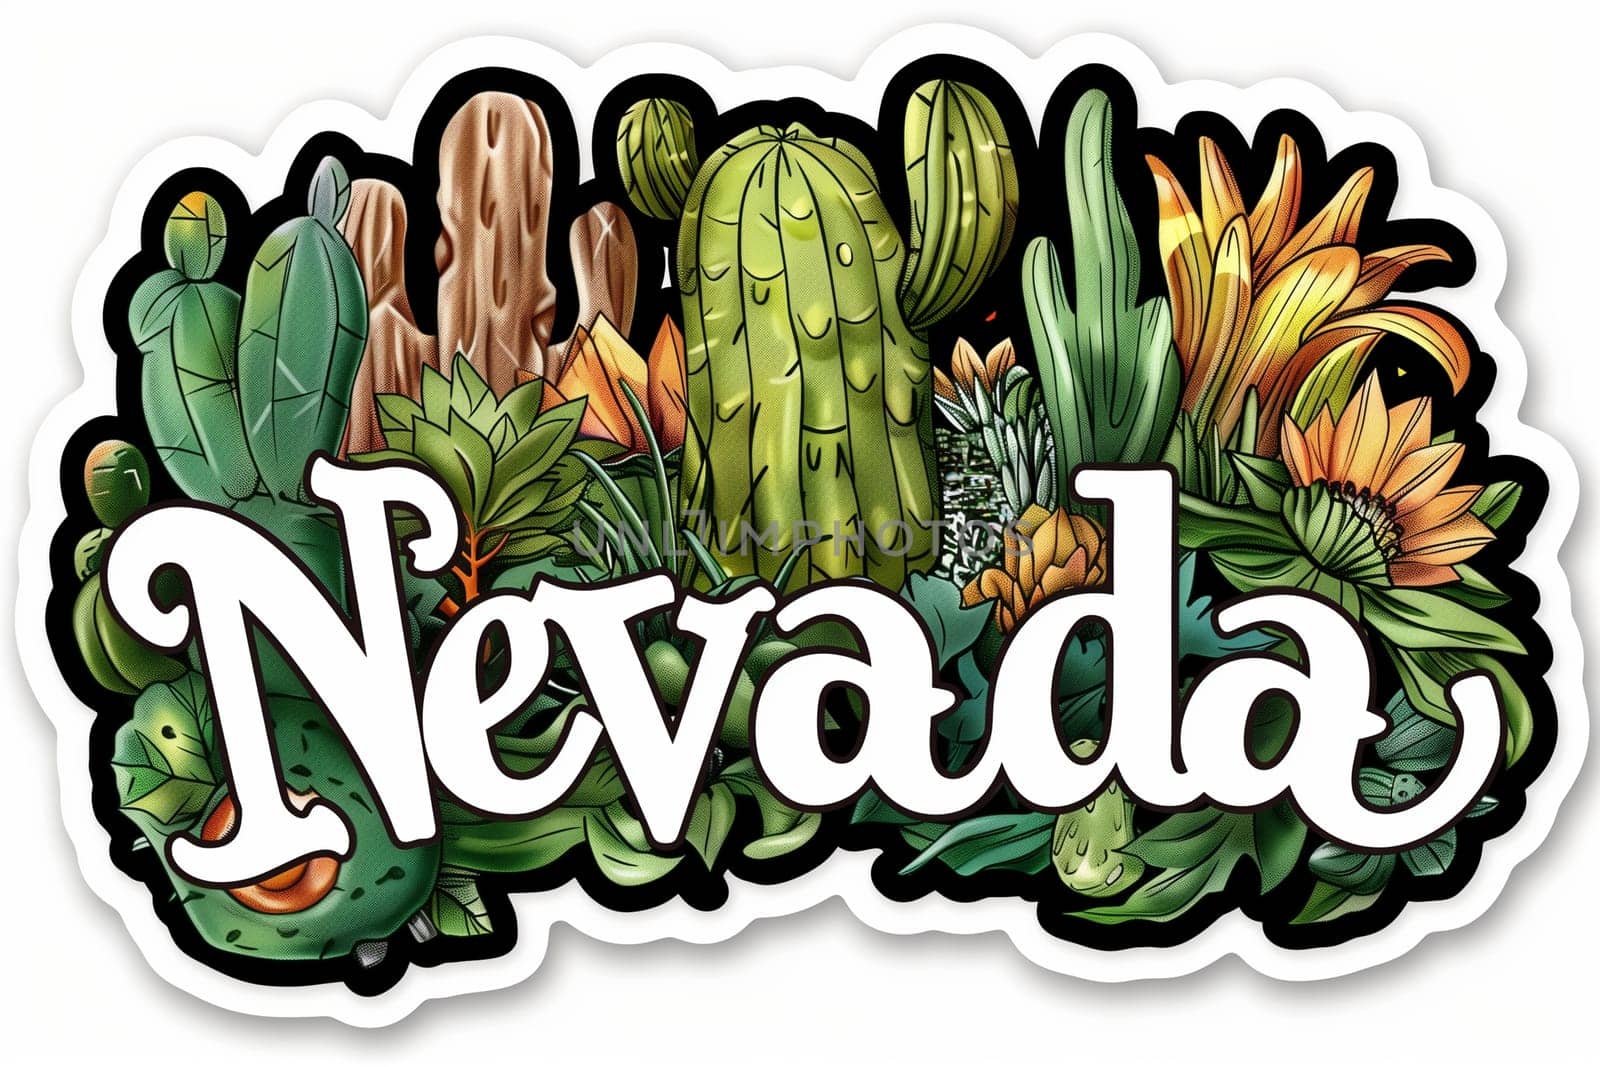 A sticker featuring the word Nevada surrounded by illustrations of cacti plants.